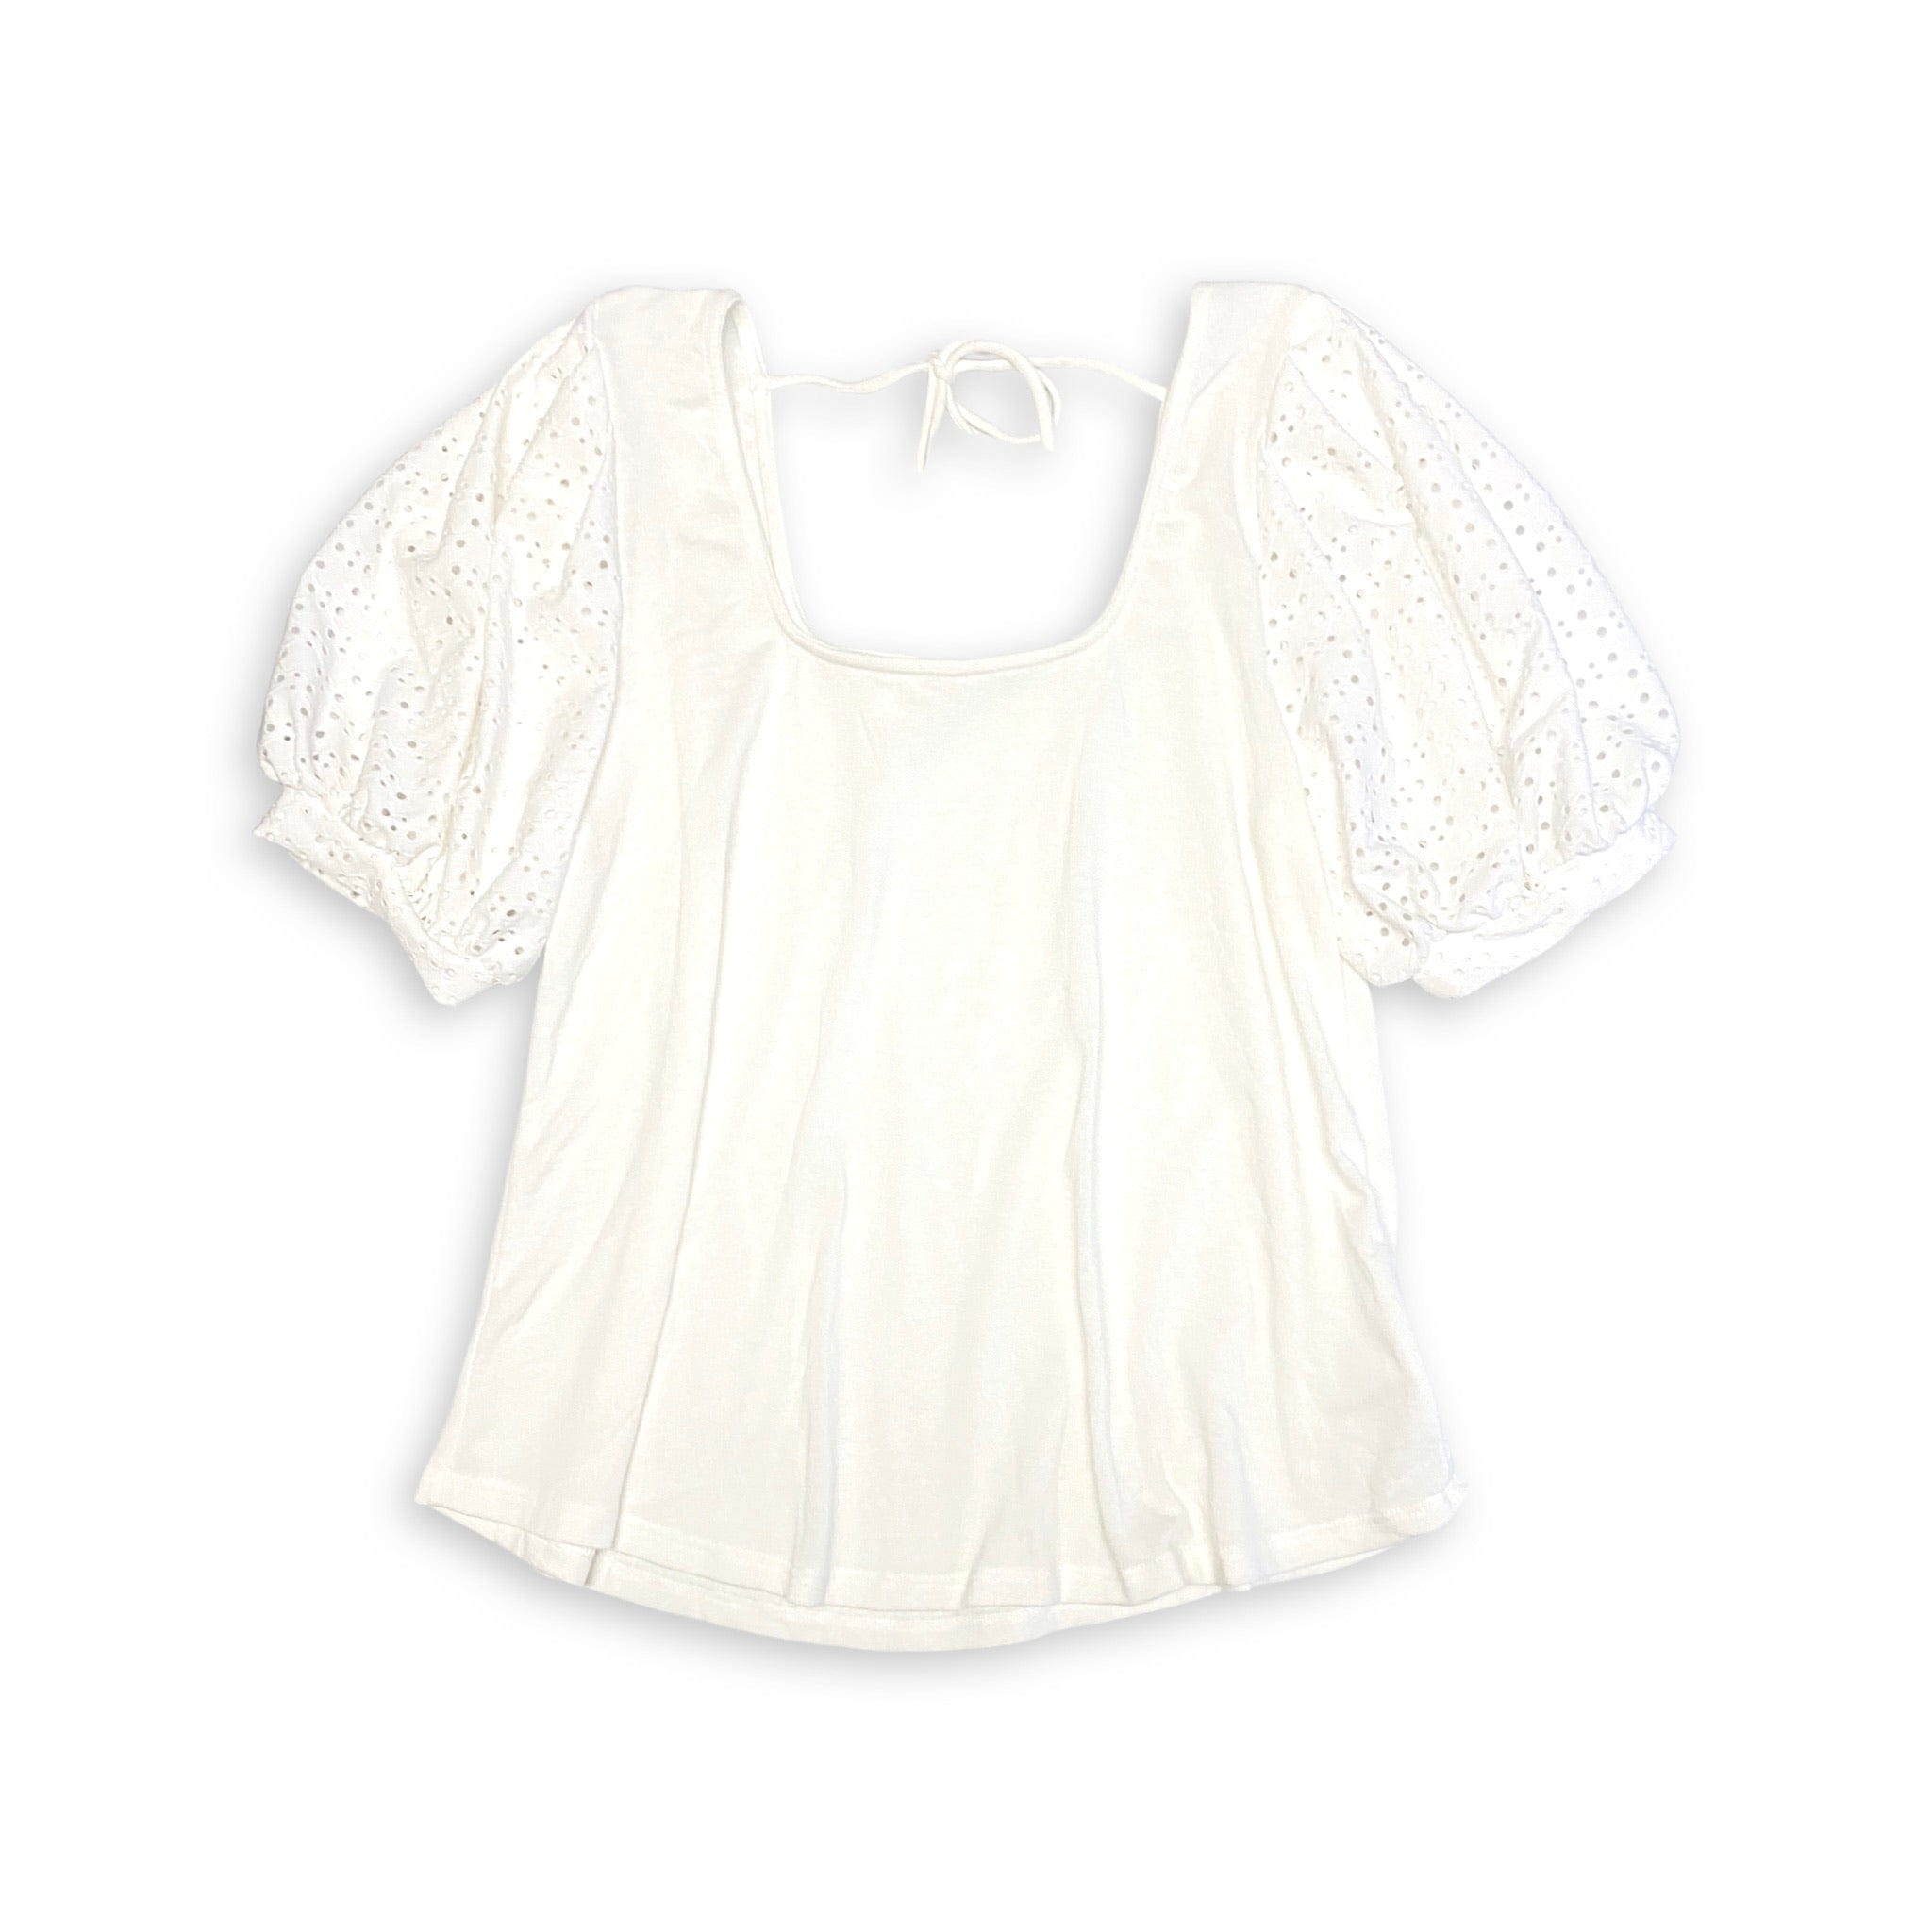 Precious Moments Top in Ivory-Emerald-Stay Foxy Boutique, Florissant, Missouri